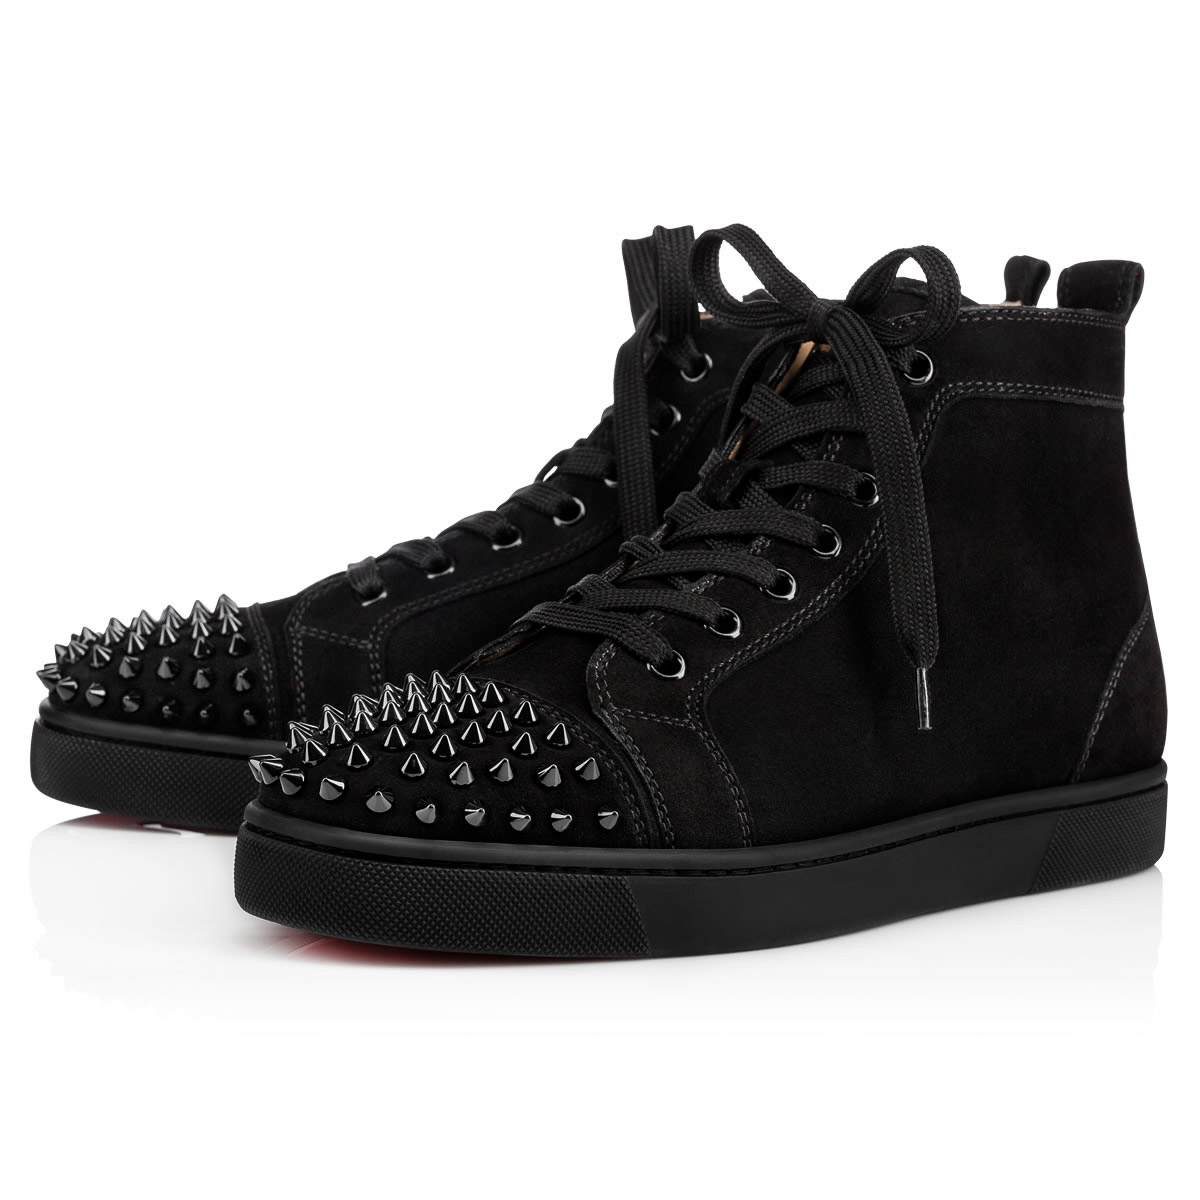 Lou Spikes - Sneakers - Suede calf and spikes - Black - Christian